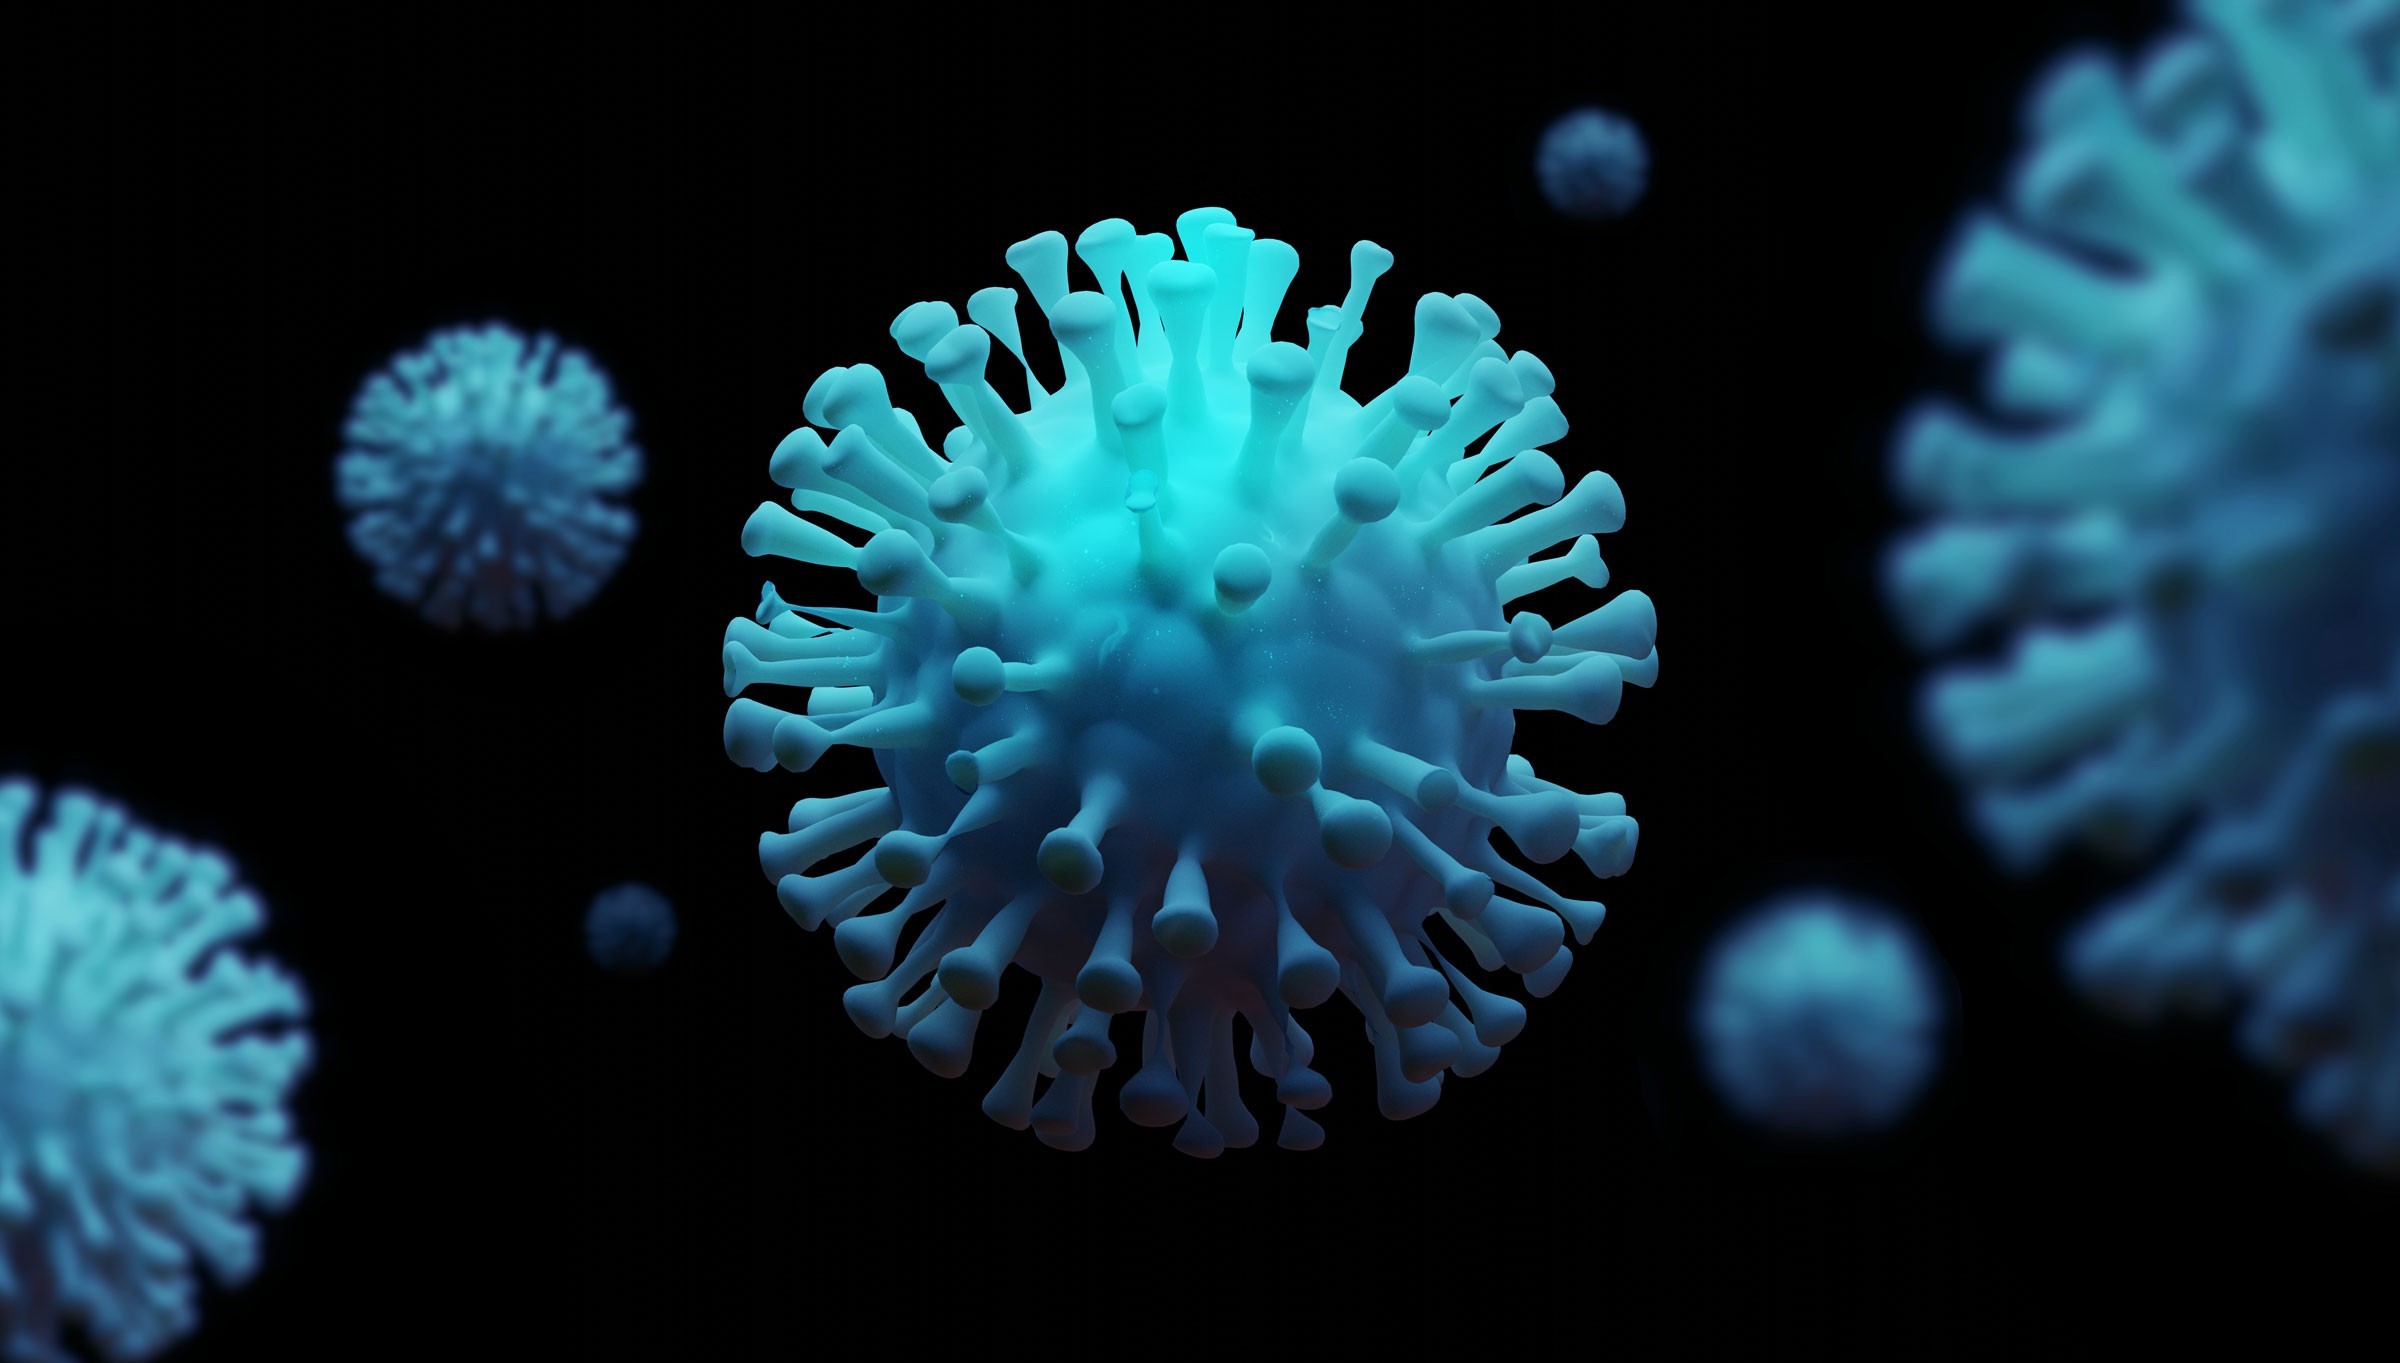 550 Coronavirus Pictures HD  Download Free Images on Unsplash